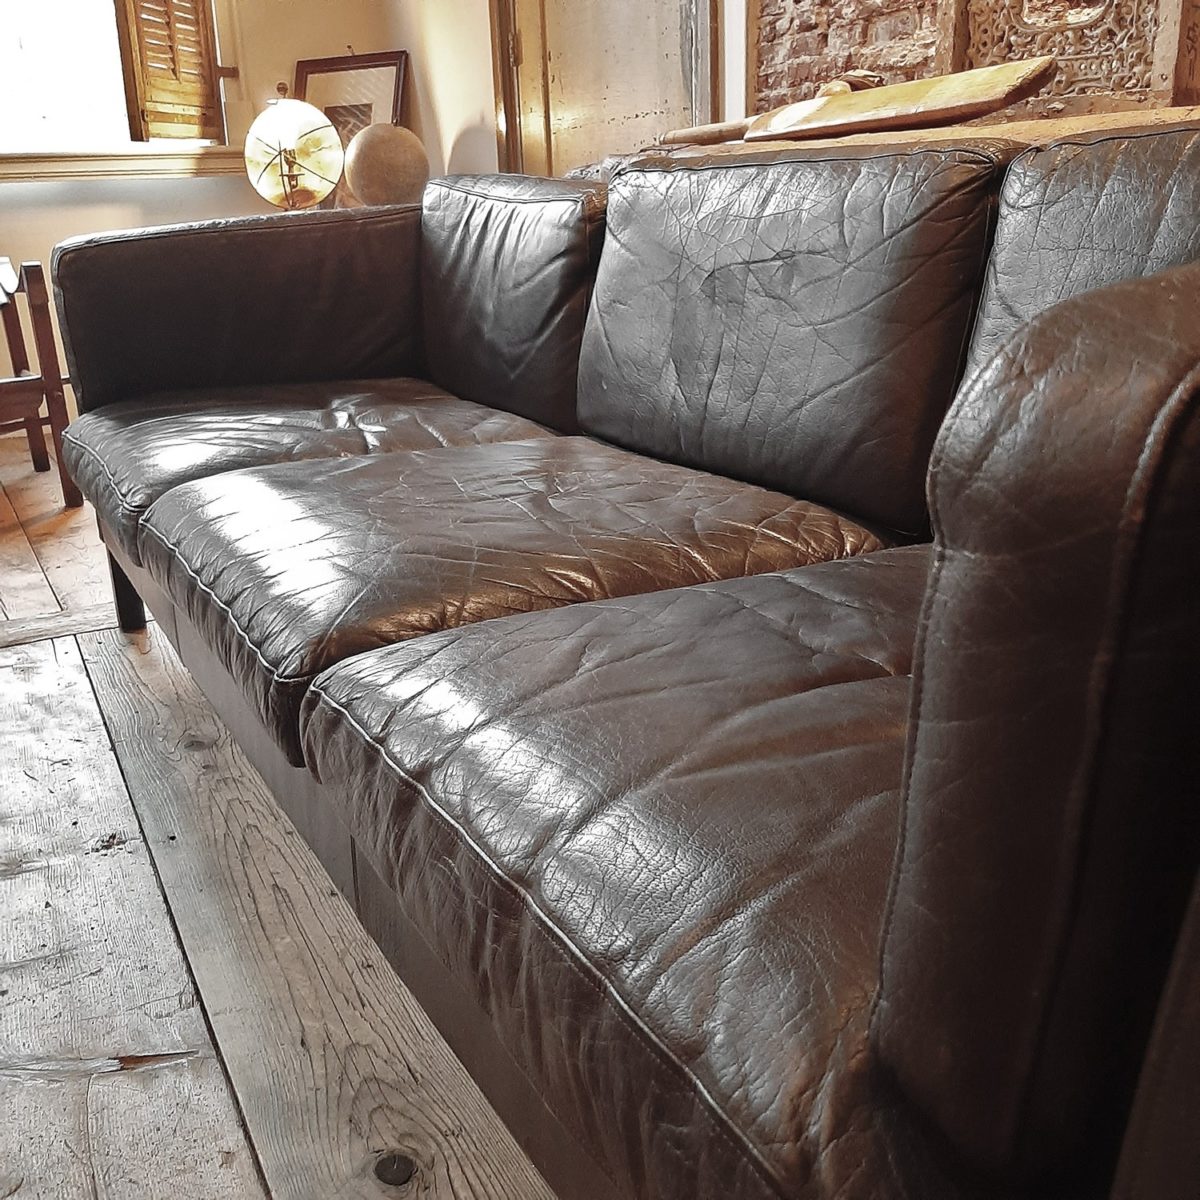 Genuine Old Vintage Brown Leather Couch, Vintage Brown Leather Couch